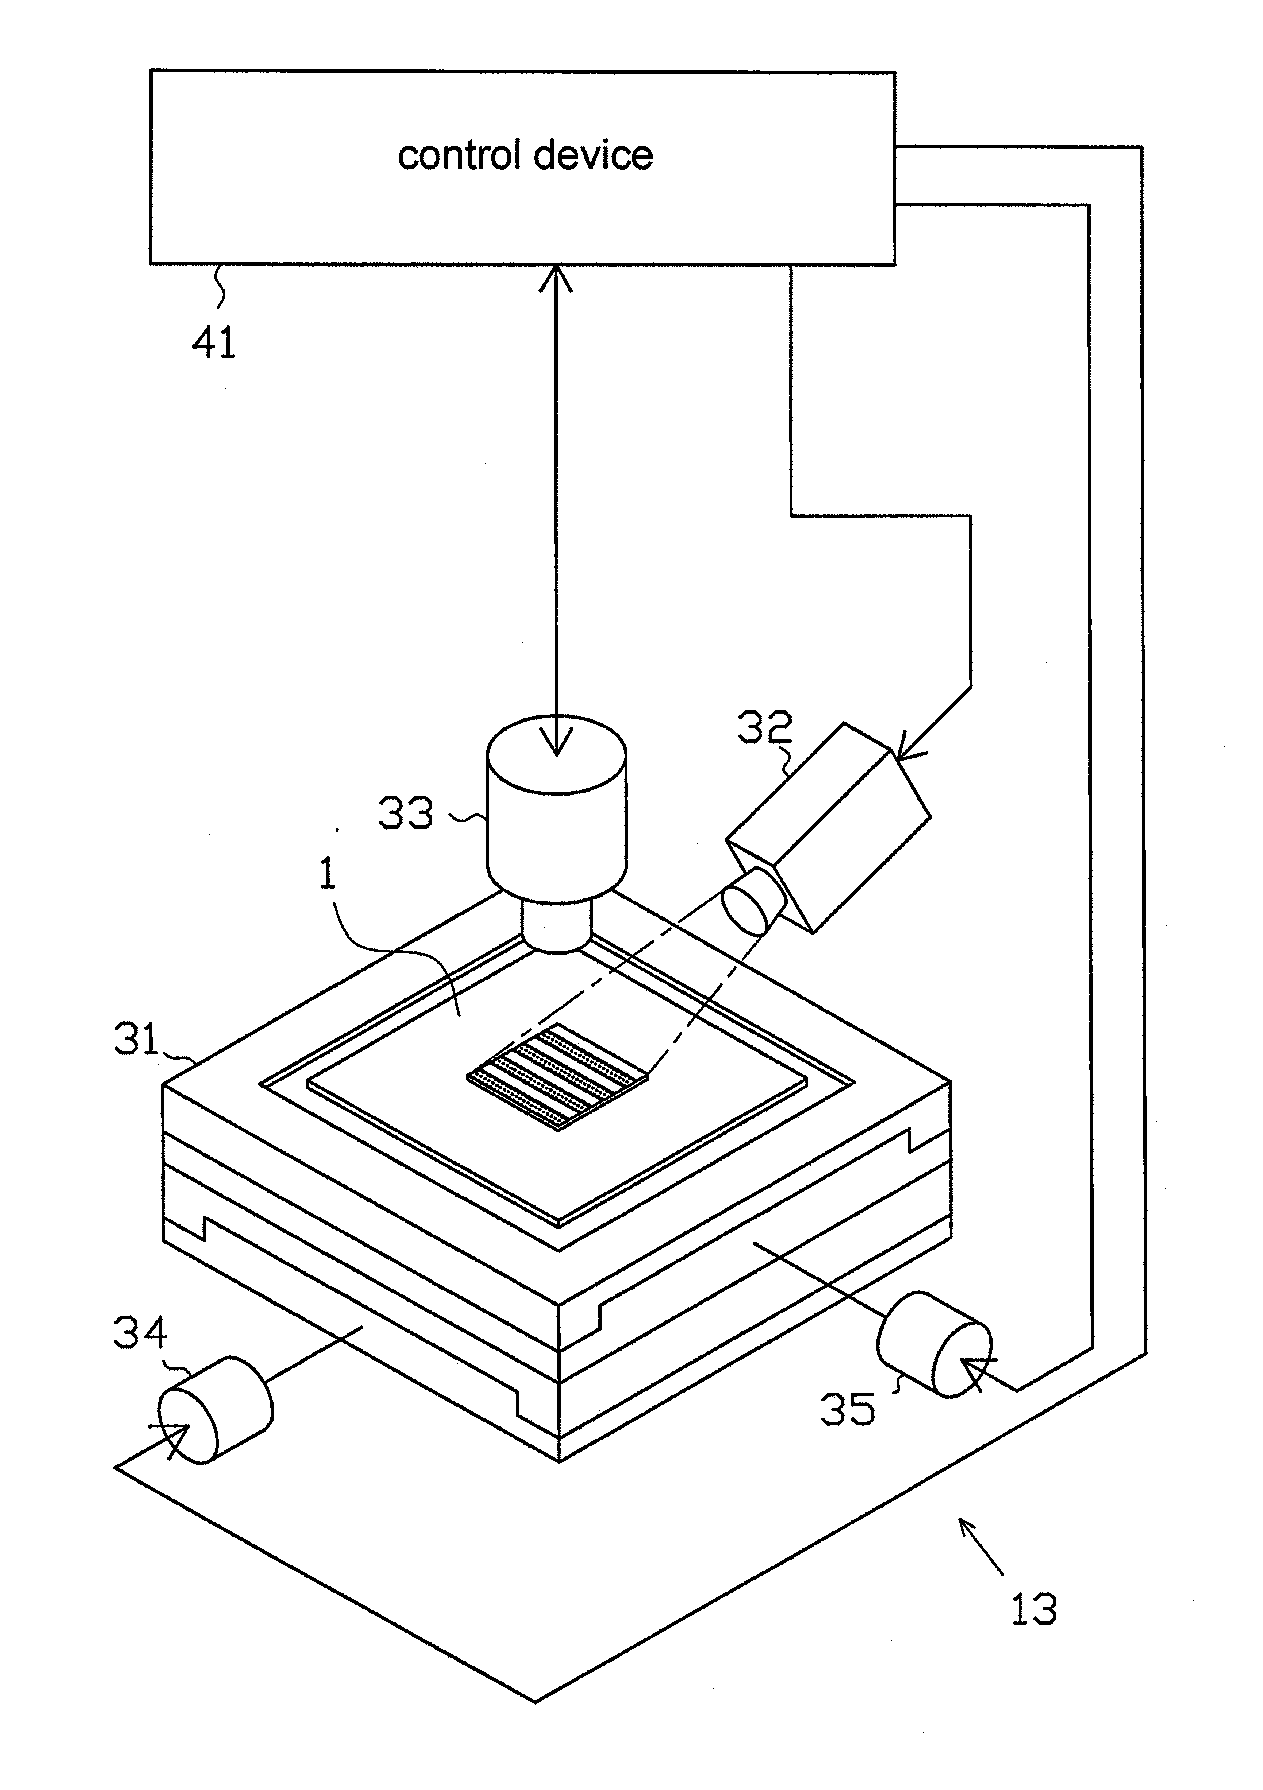 Solder printing inspection apparatus and solder printing system